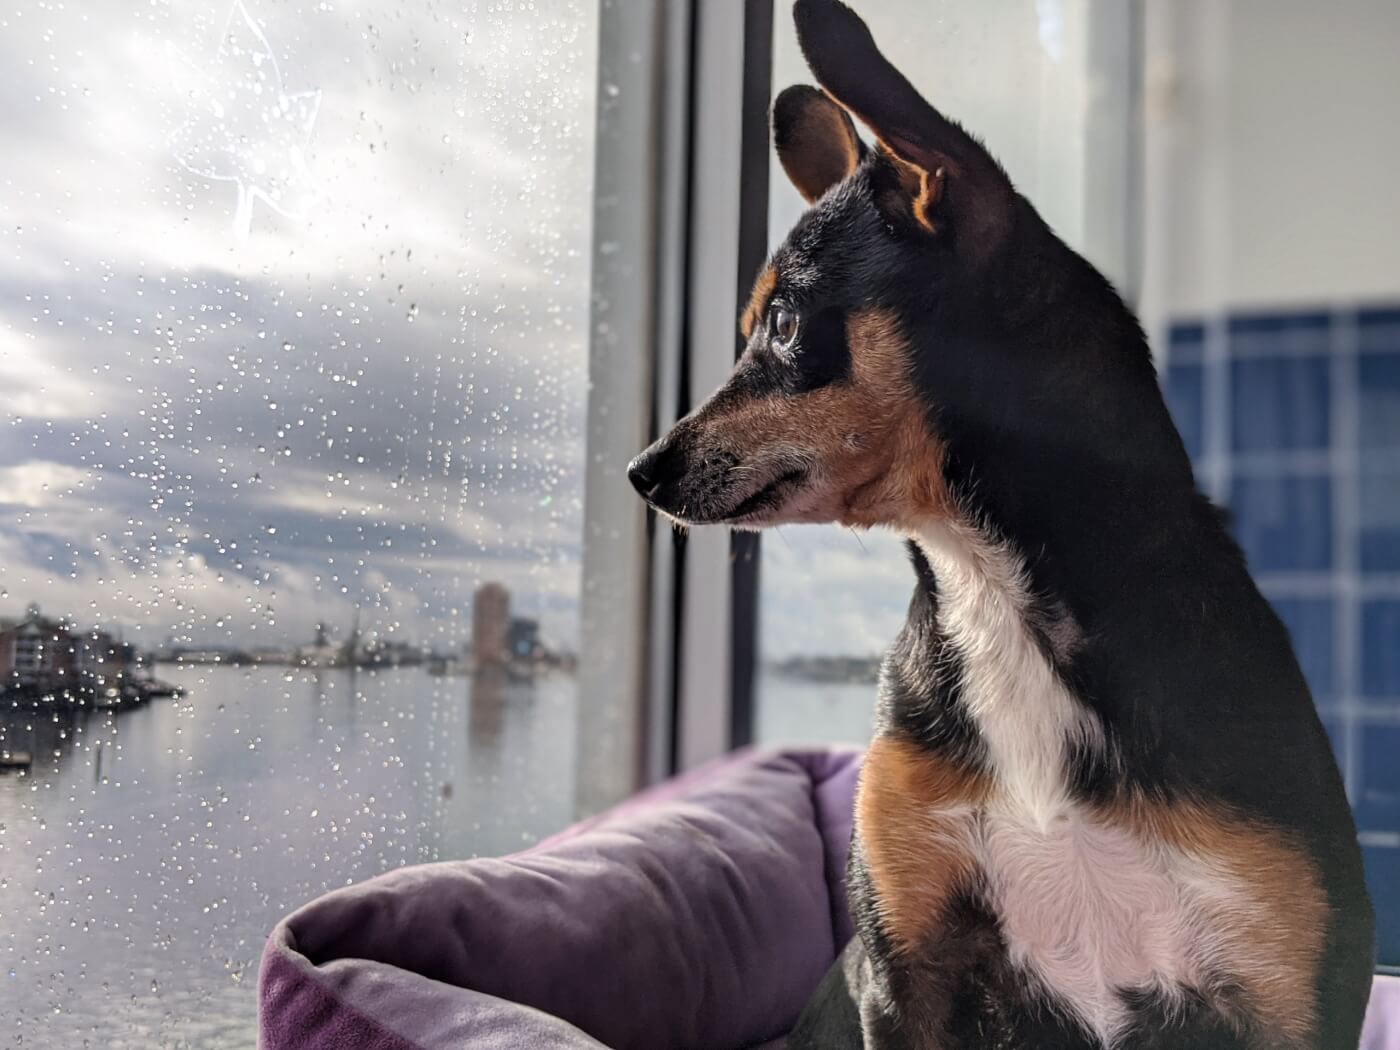 Apple Jack, a dog rescued by PETA, looking out window on a rainy day